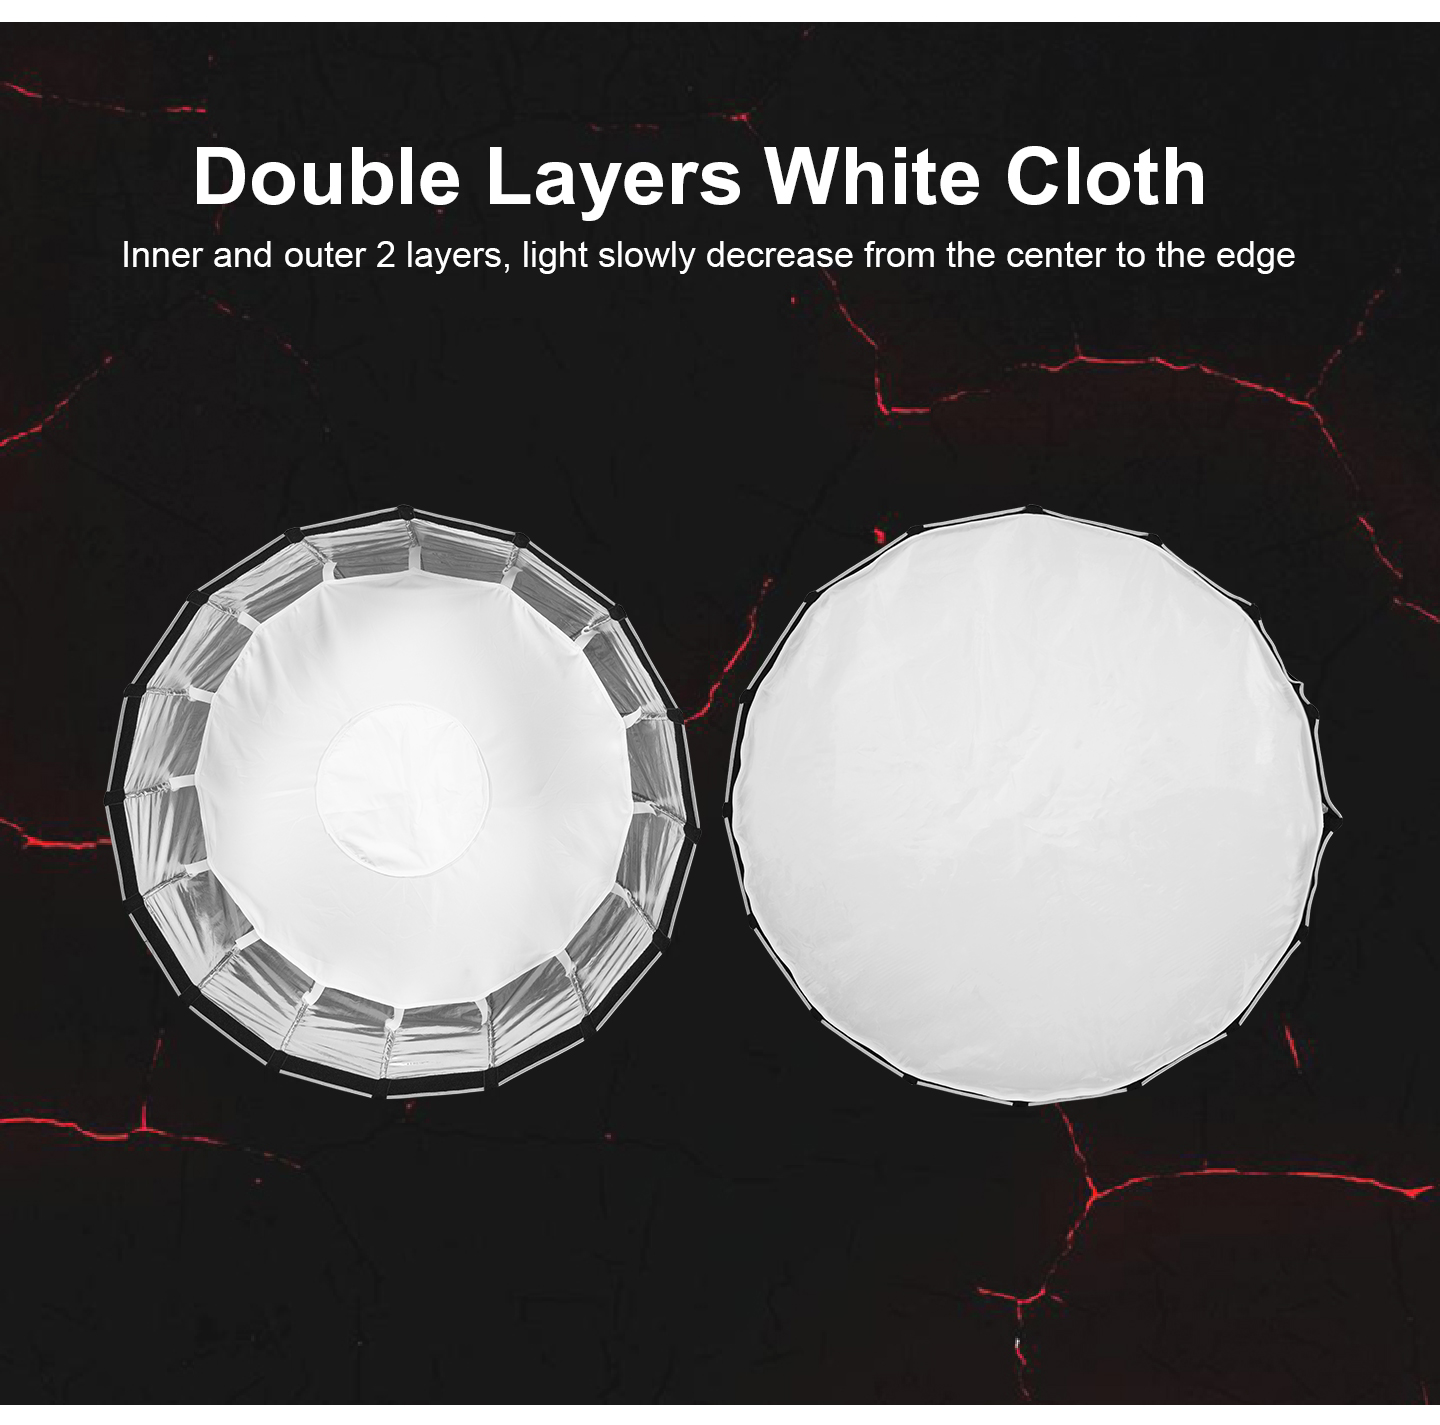 Doublle Layers White Cloth